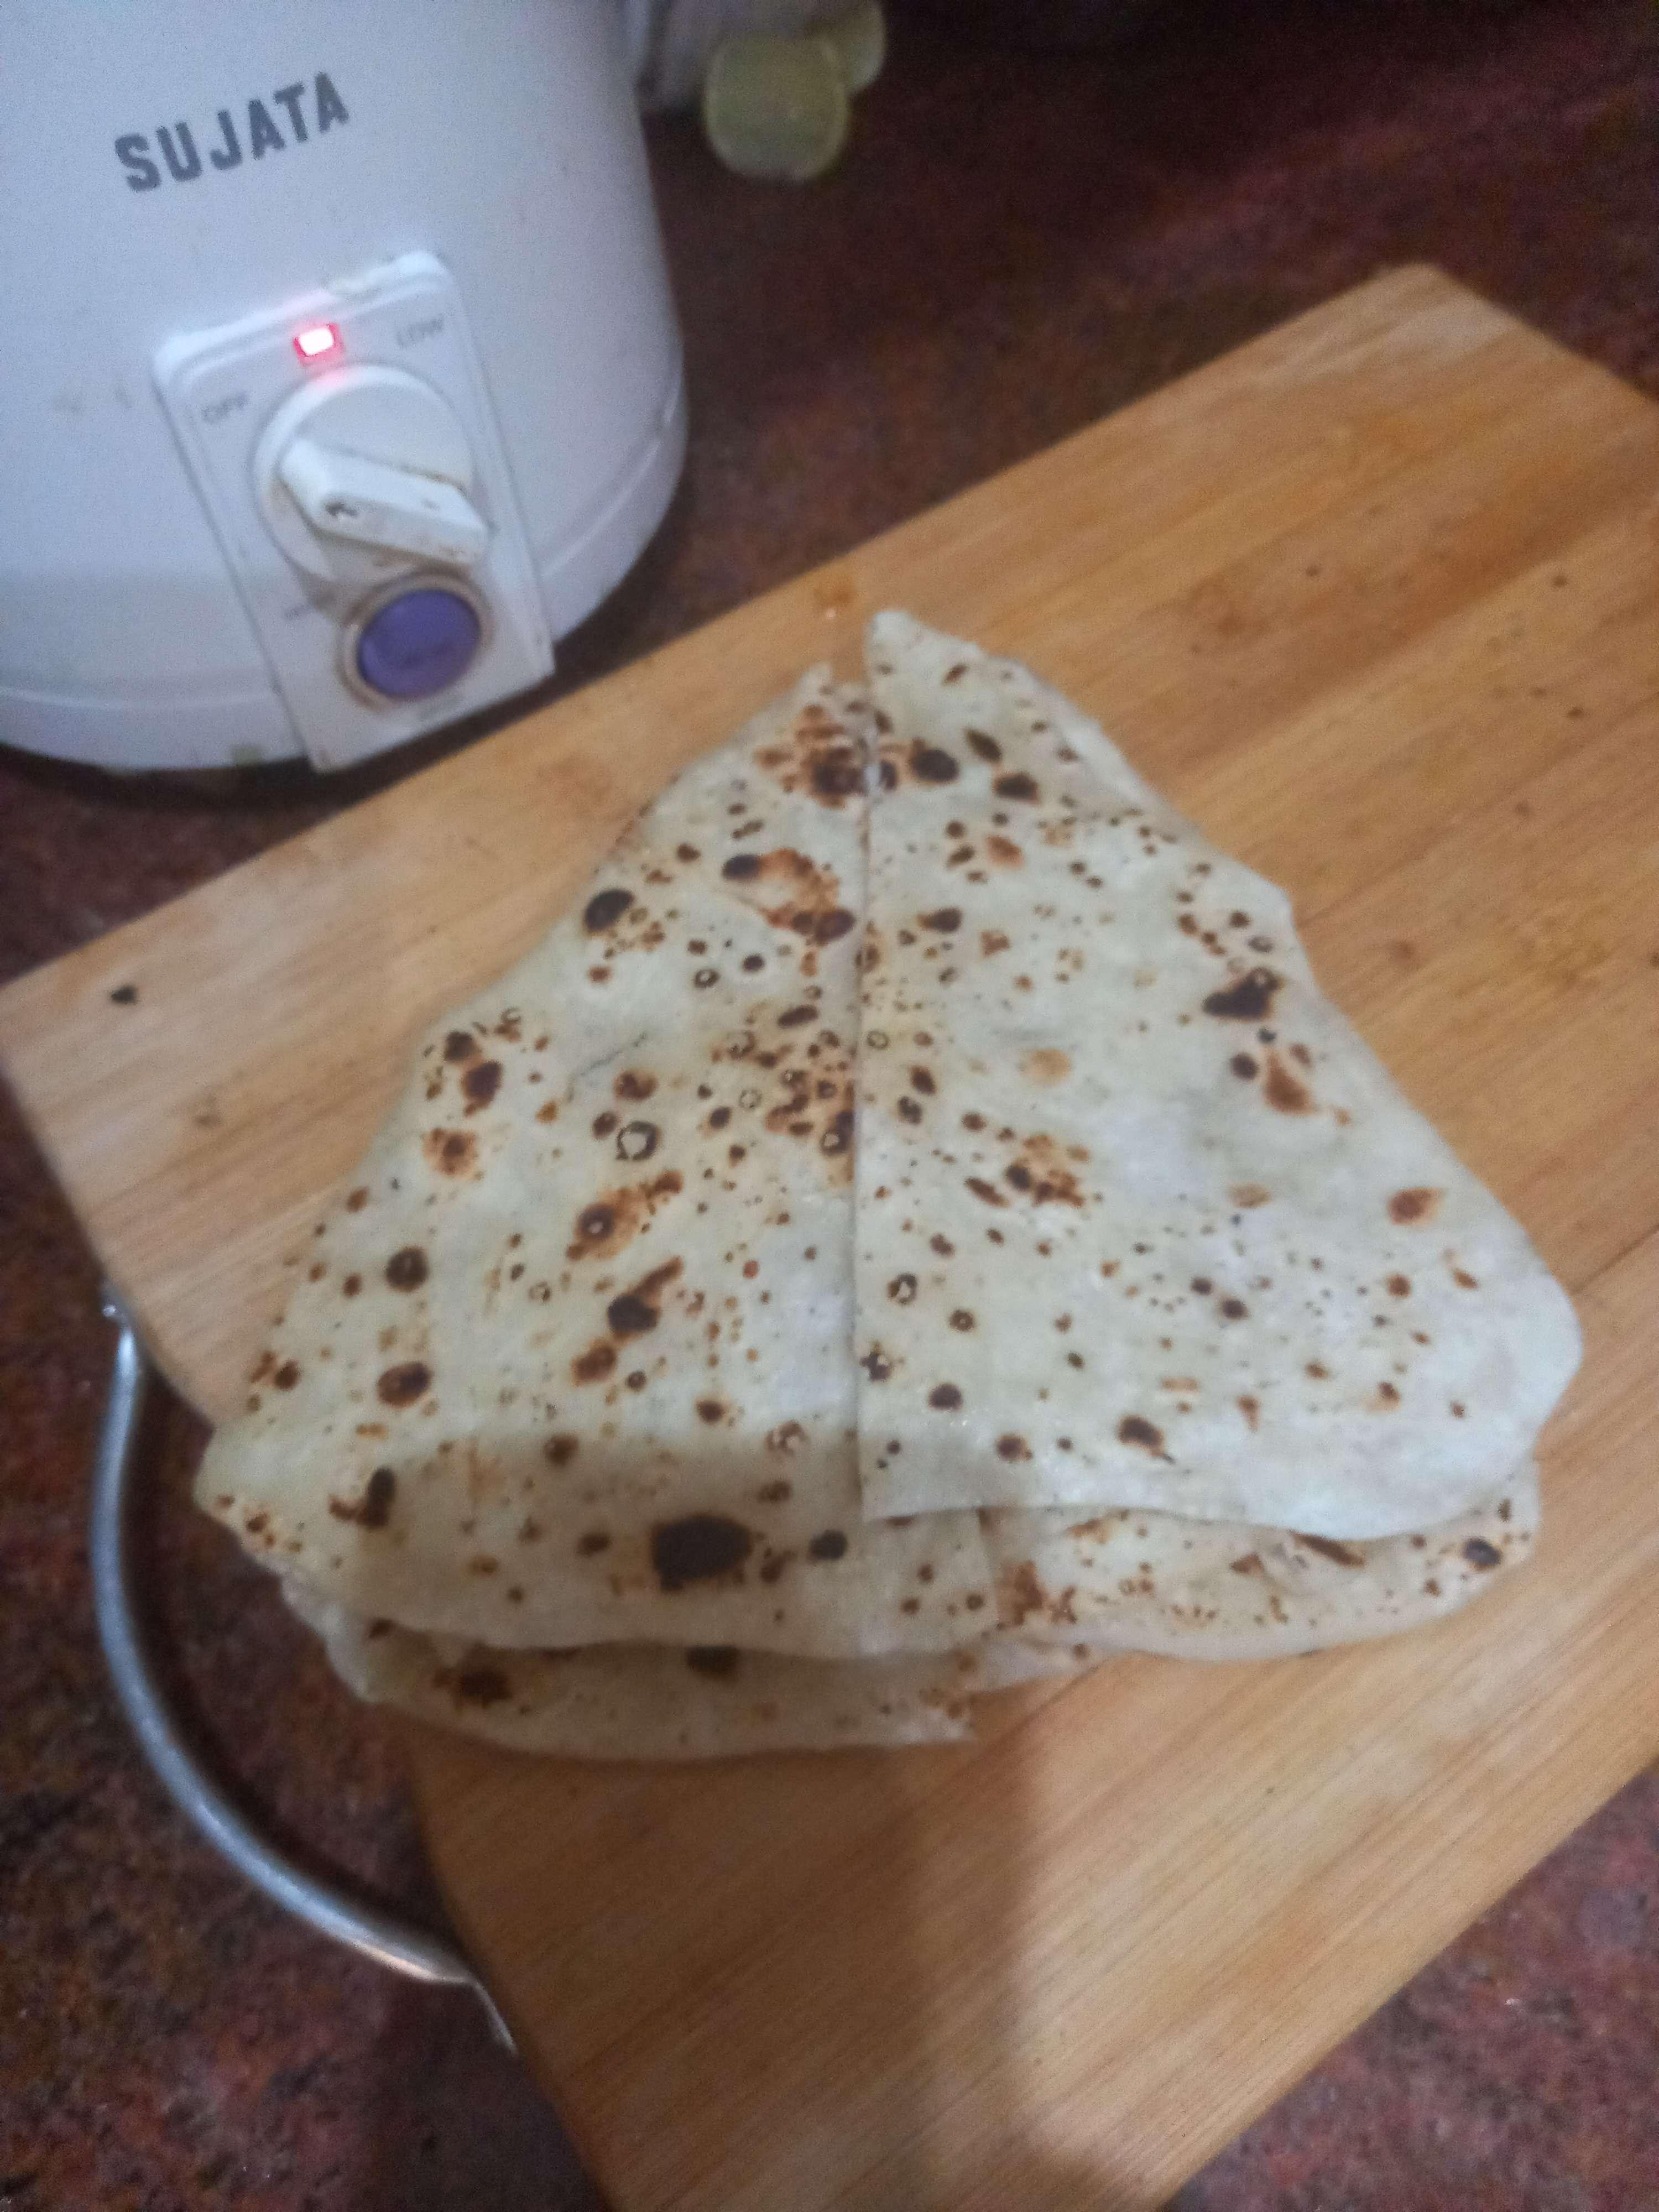 Delicious Butter Naan prepared by COOX